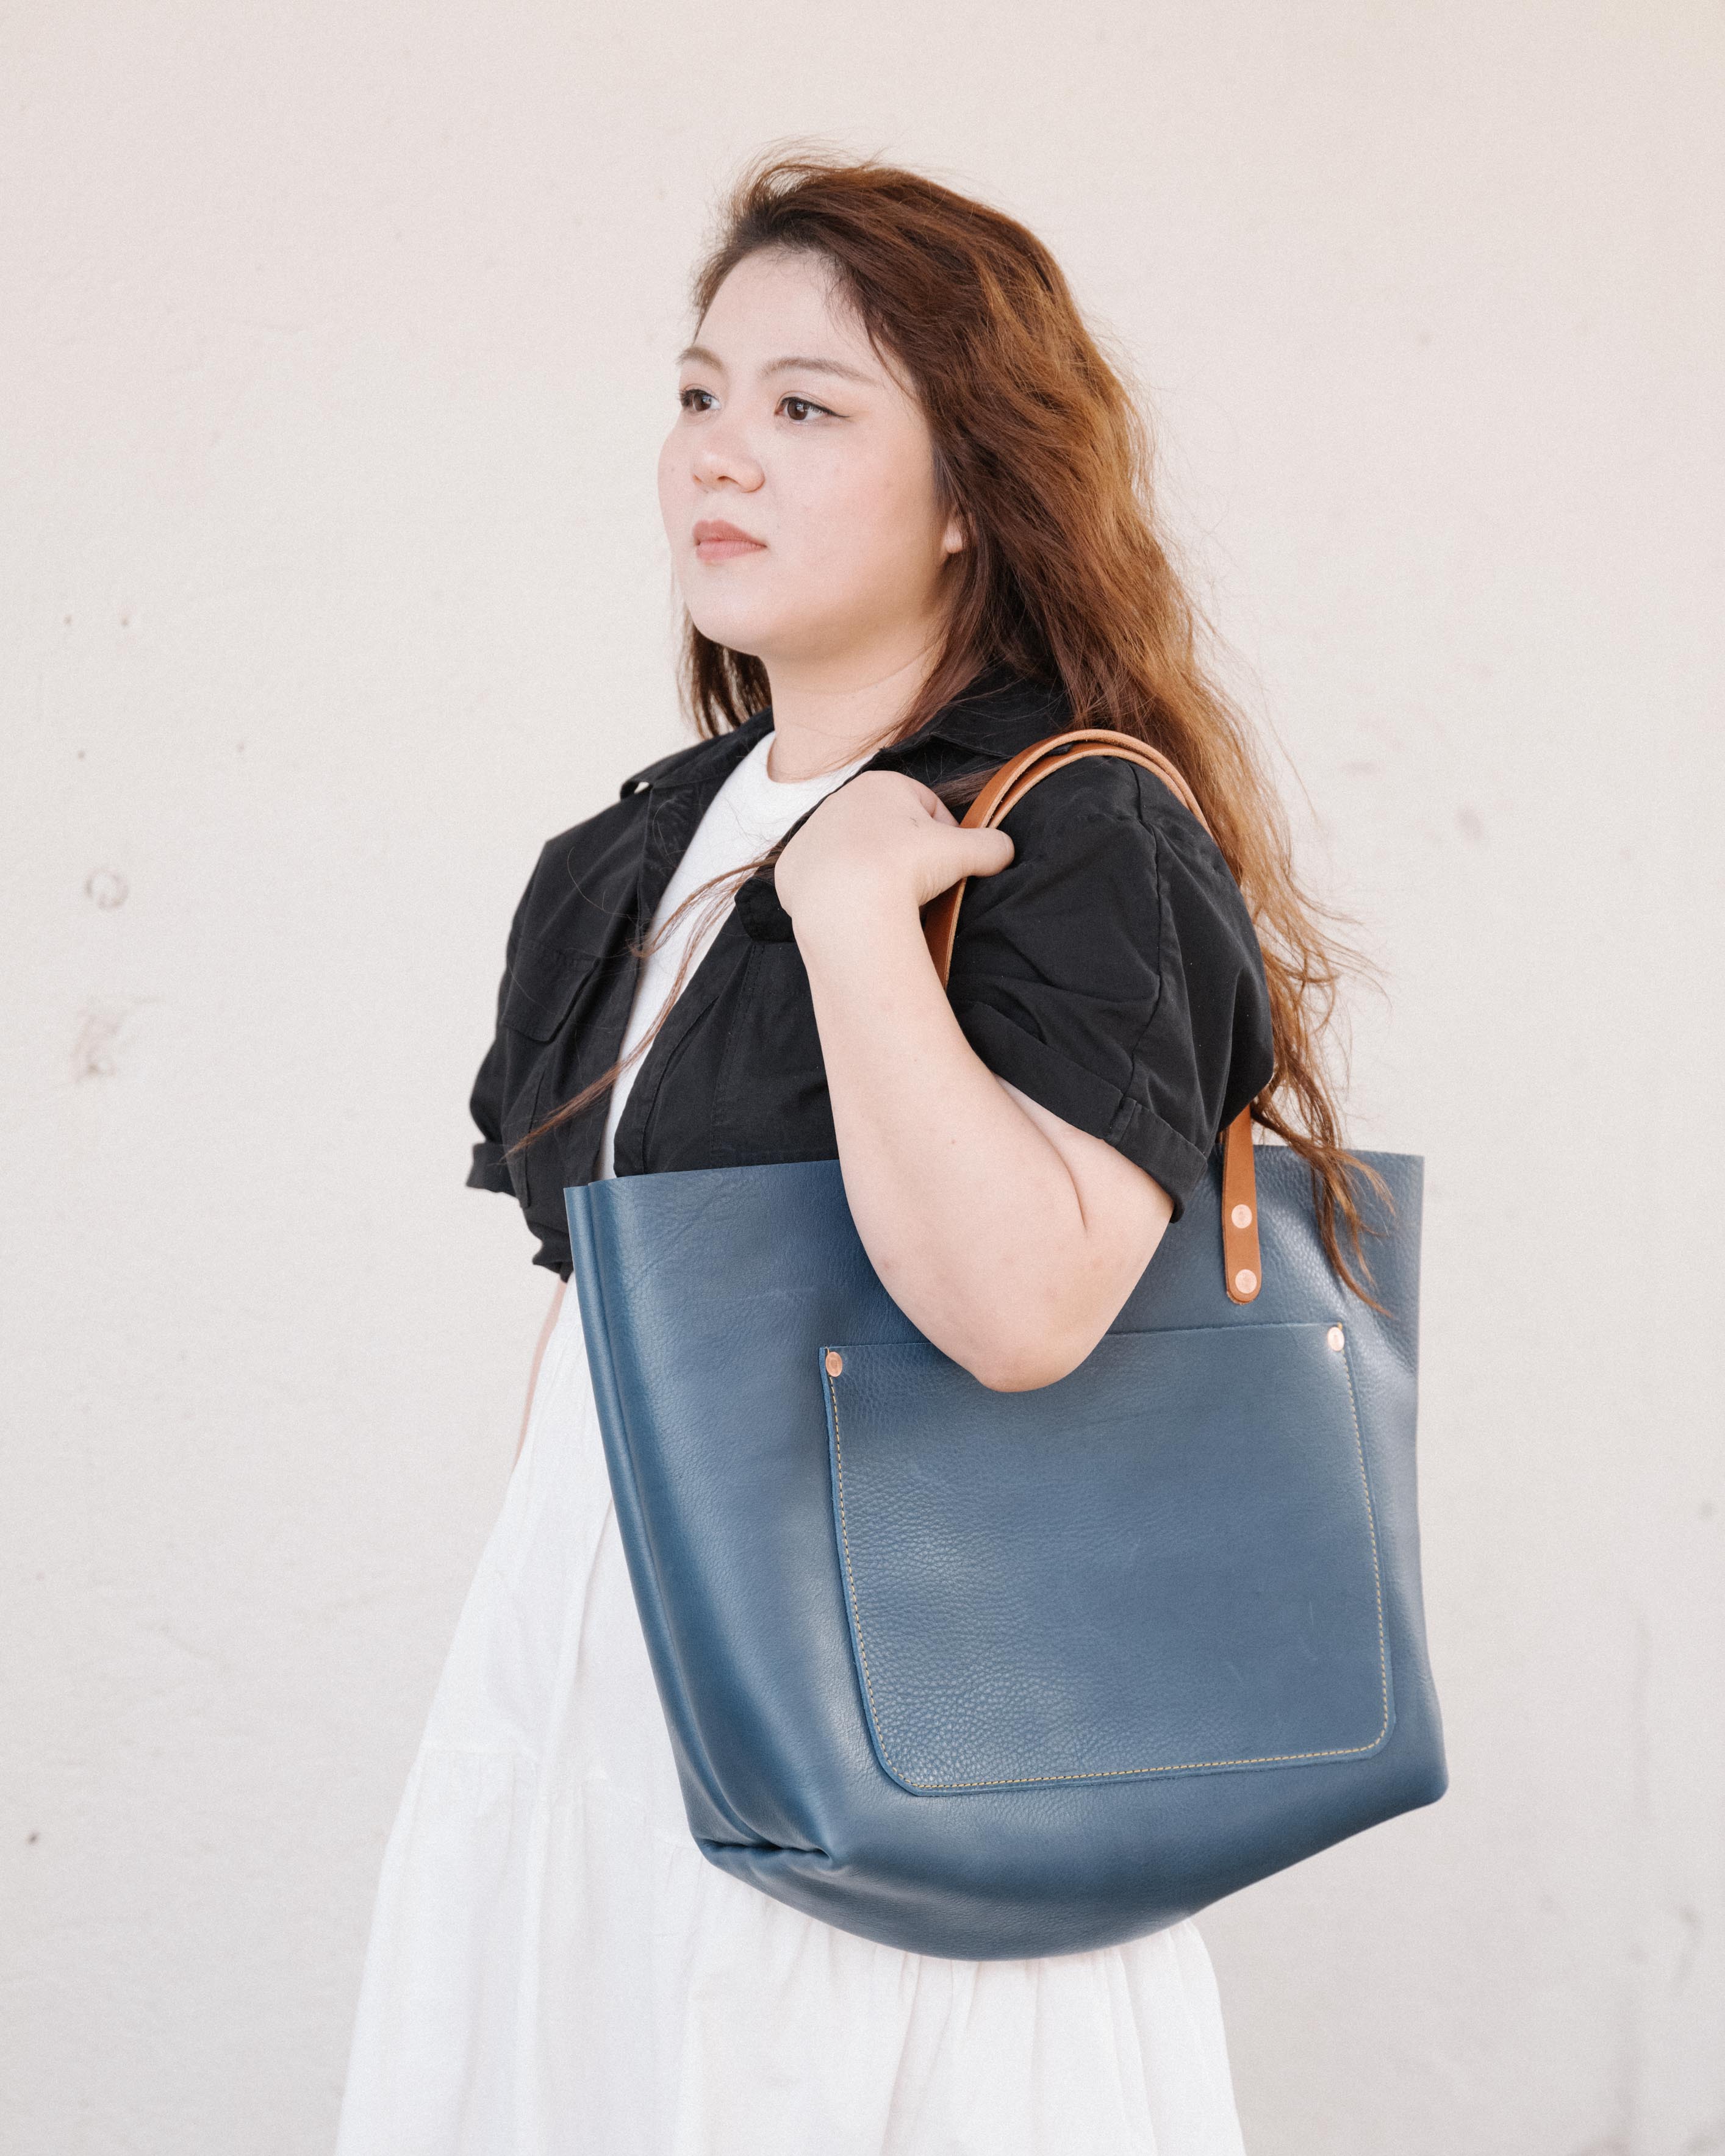 Navy Kodiak  Navy Blue Leather Tote Bags, Handbags, and Clutch Bags –  tagged Tassels – KMM & Co.